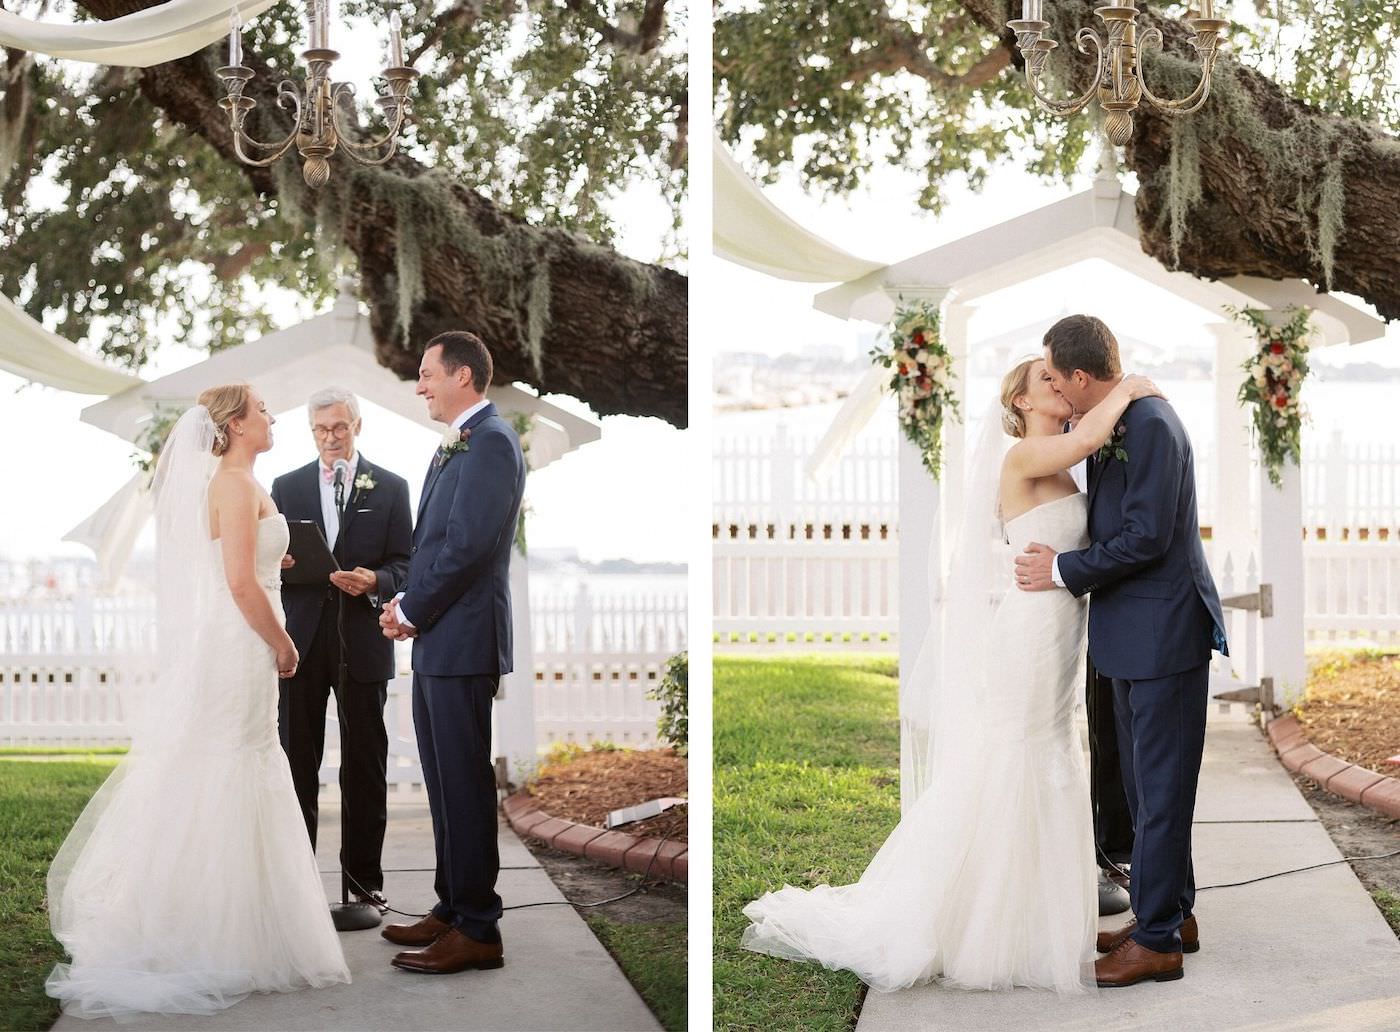 Bride and Groom First Kiss | Florida Fall Autumn Outdoor Waterfront Wedding Ceremony | Strapless Ivory Tulle Rouched Mermaid Vera Wang Bridal Gown with Rhinestone Beaded Sash Waistband | Groom in Classic Navy Blue Suit